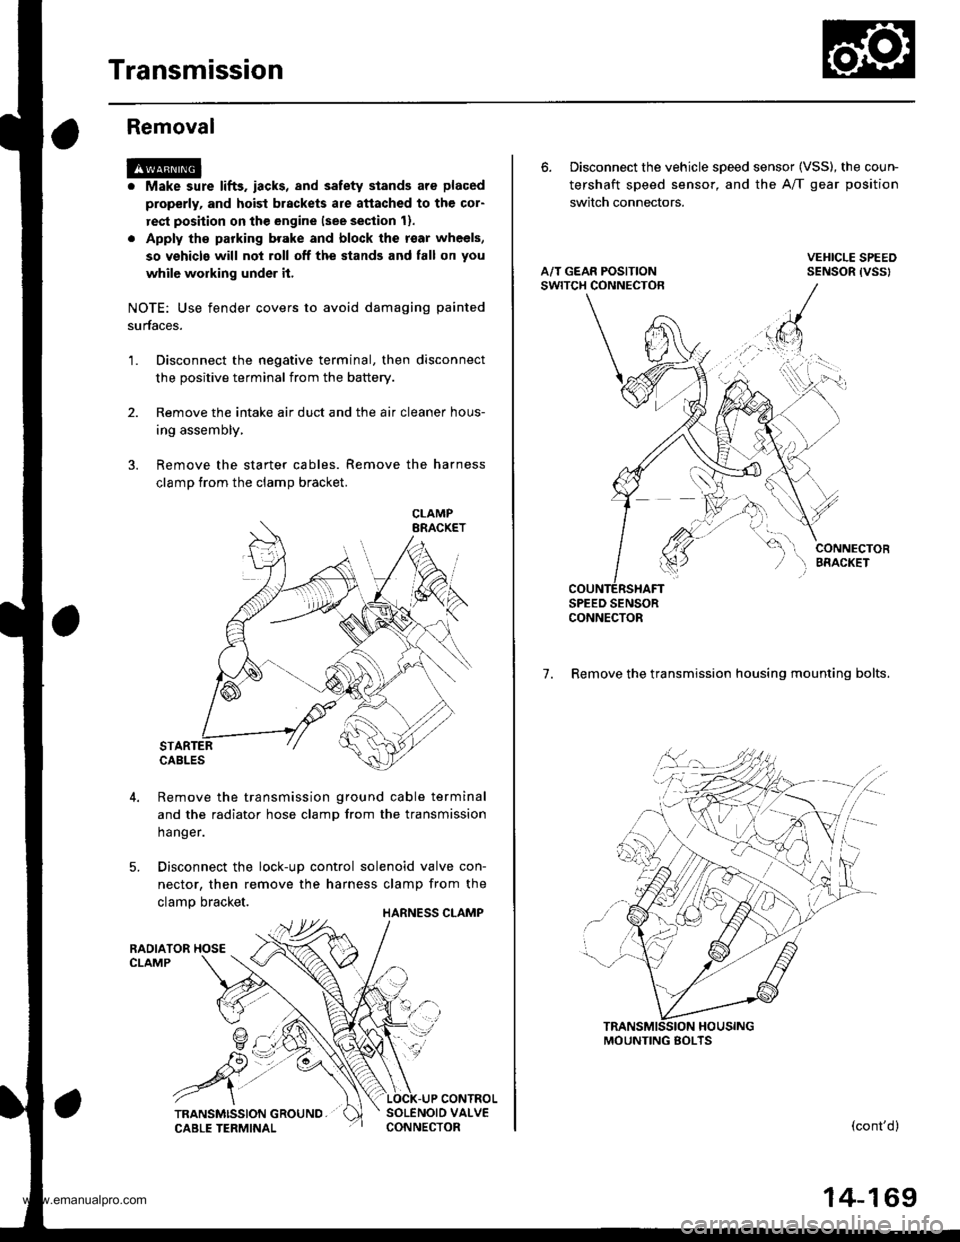 HONDA CR-V 1999 RD1-RD3 / 1.G User Guide 
Transmission
Removal
@
2.
1.
Make sure lifts. iacks, and safety stands aro placed
properly, and hoist brackets are attached to the col-
rest position on the engine lsee section 11.
Apply th€ parki